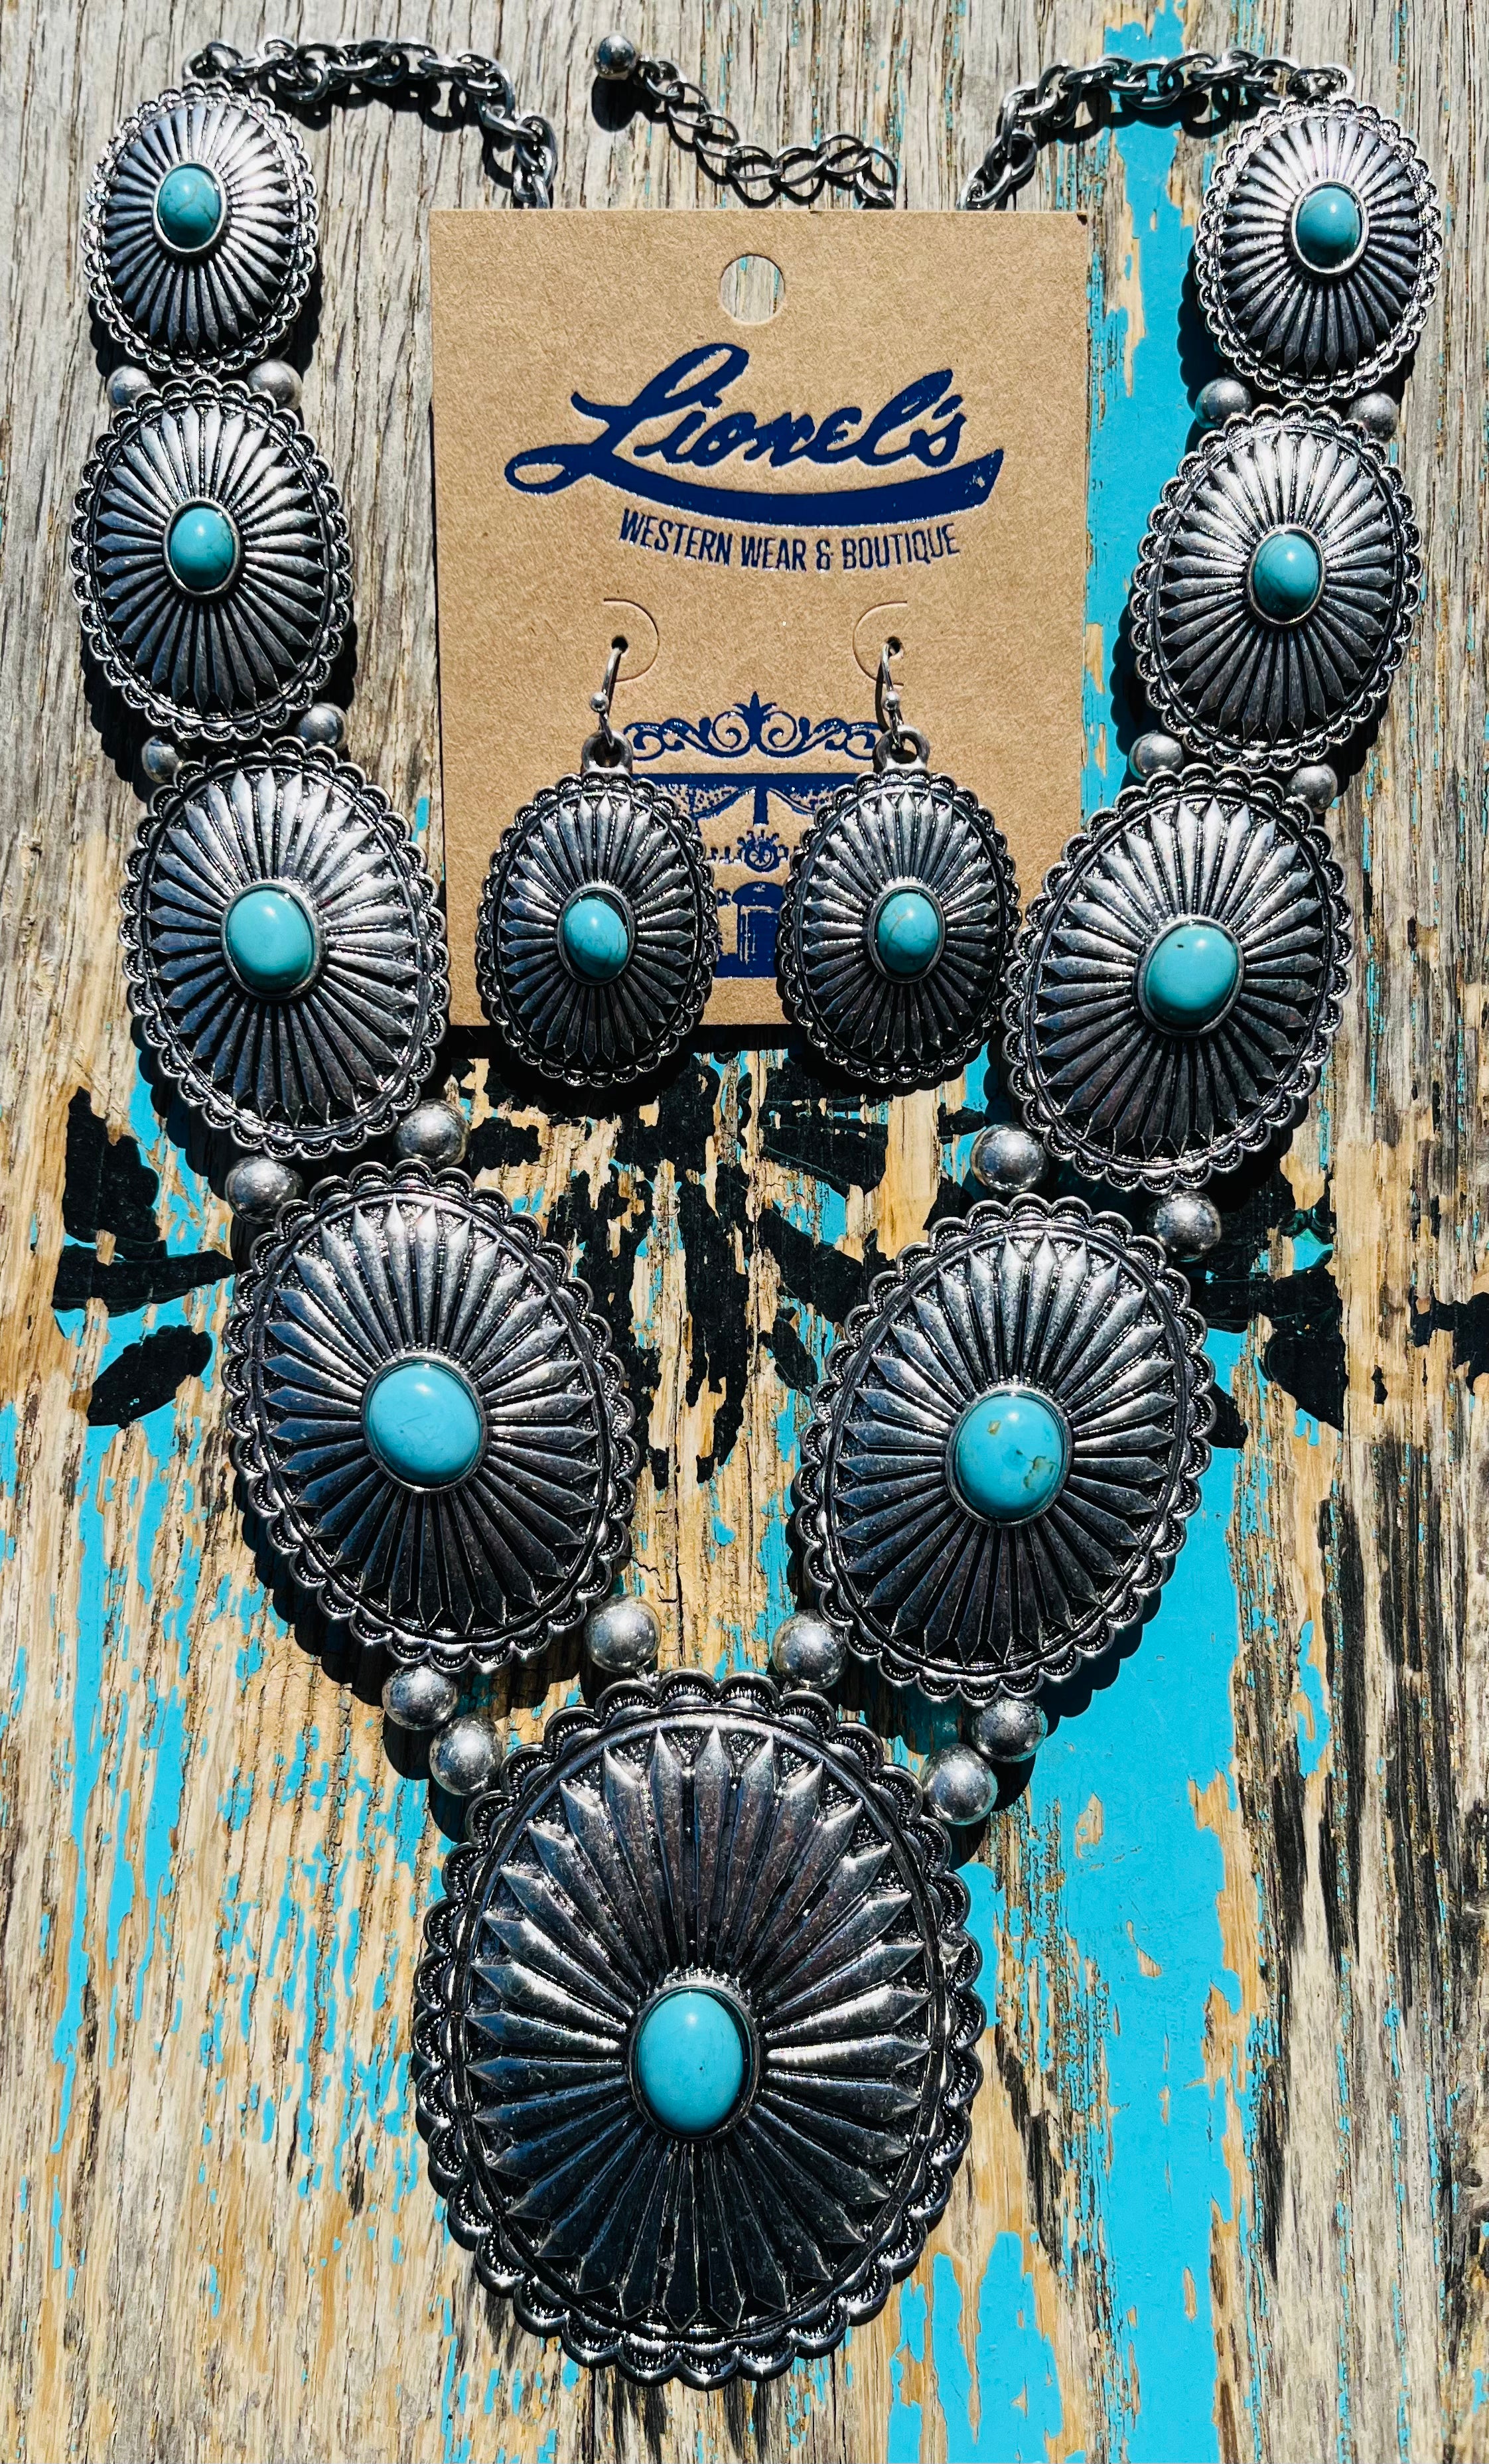 Oval Concho w/ Turquoise Center Squash Blossom Necklace w/Earrings